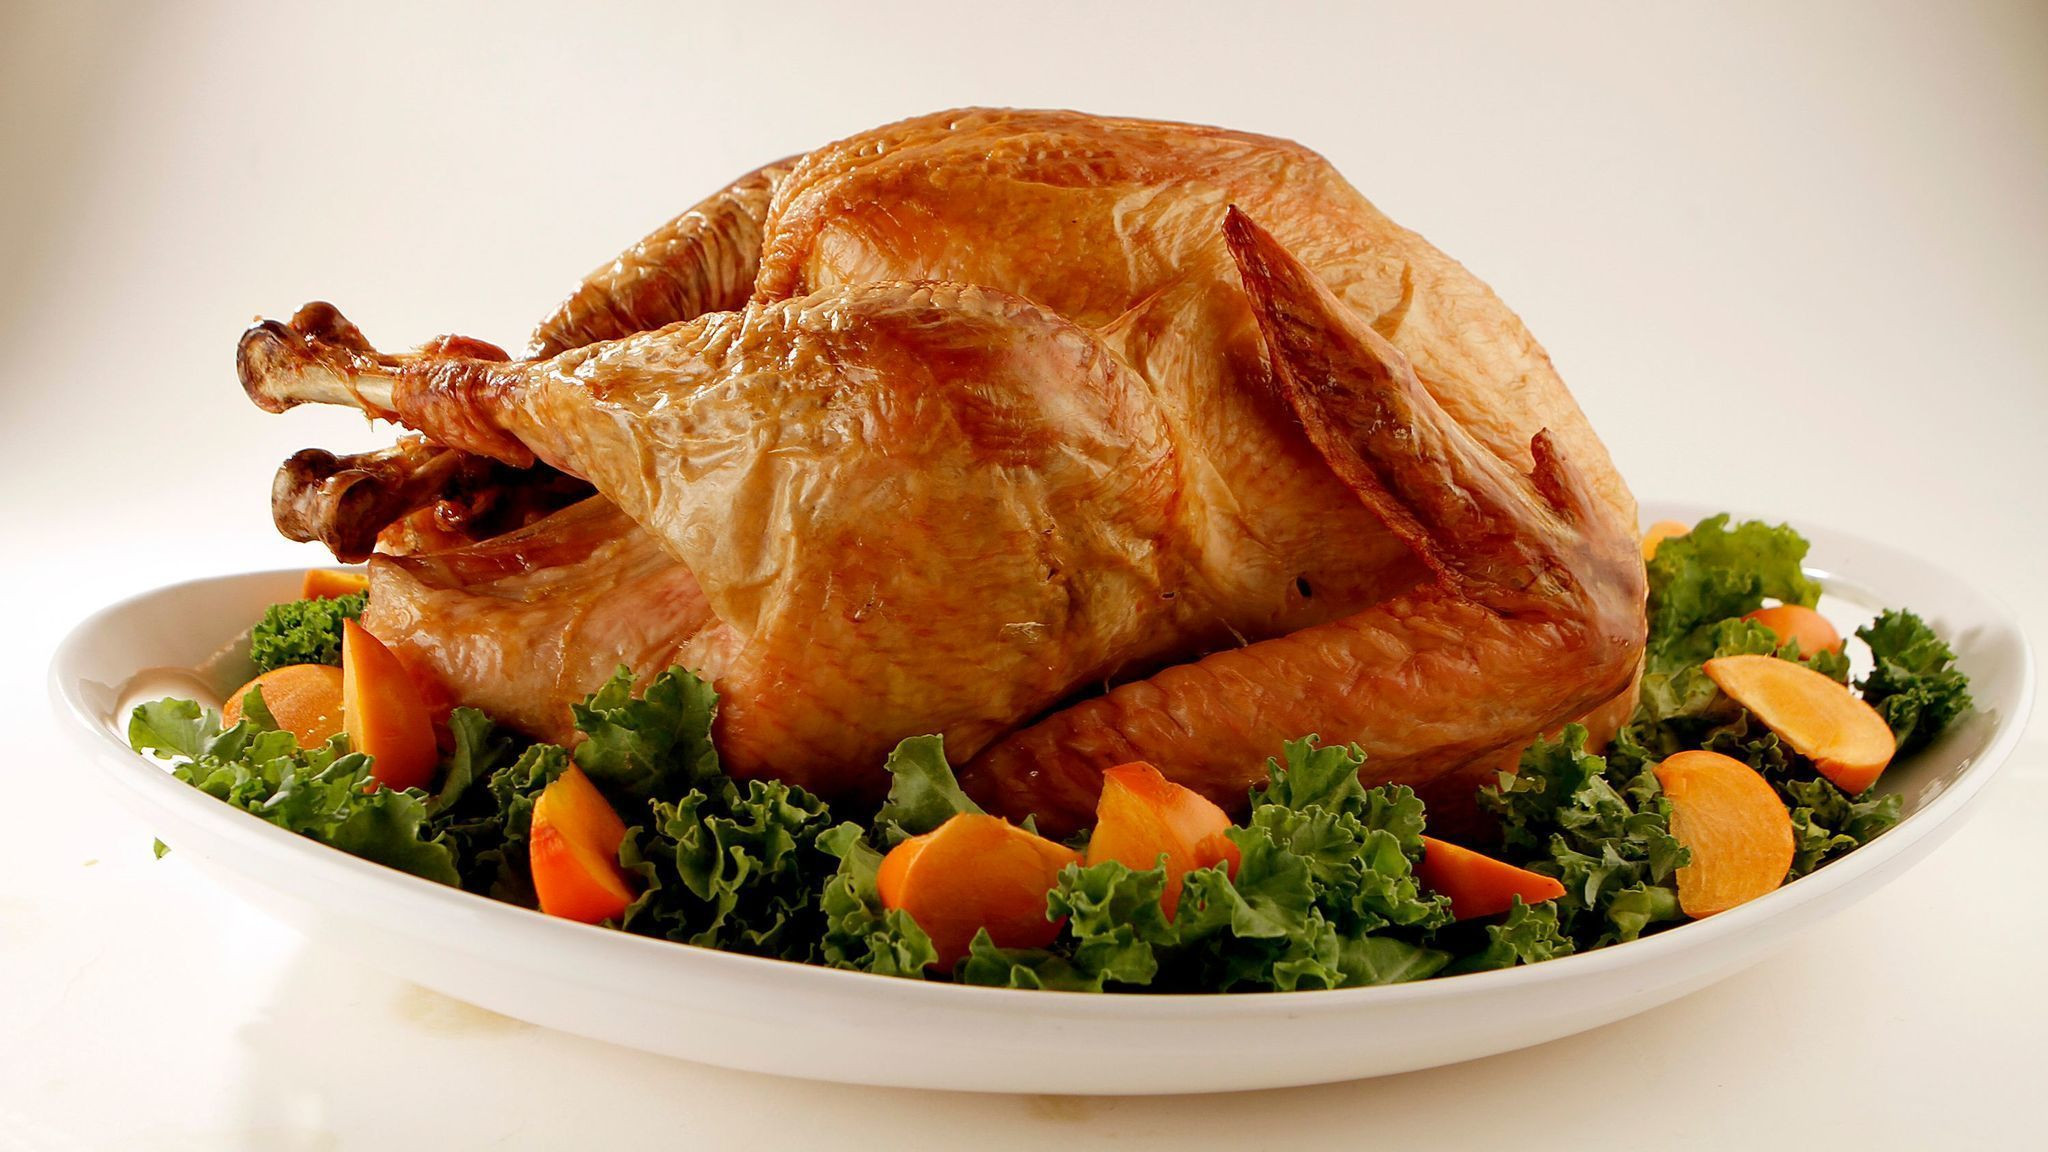 Turkey Thanksgiving Picture
 A beginner s guide to cooking a Thanksgiving turkey LA Times